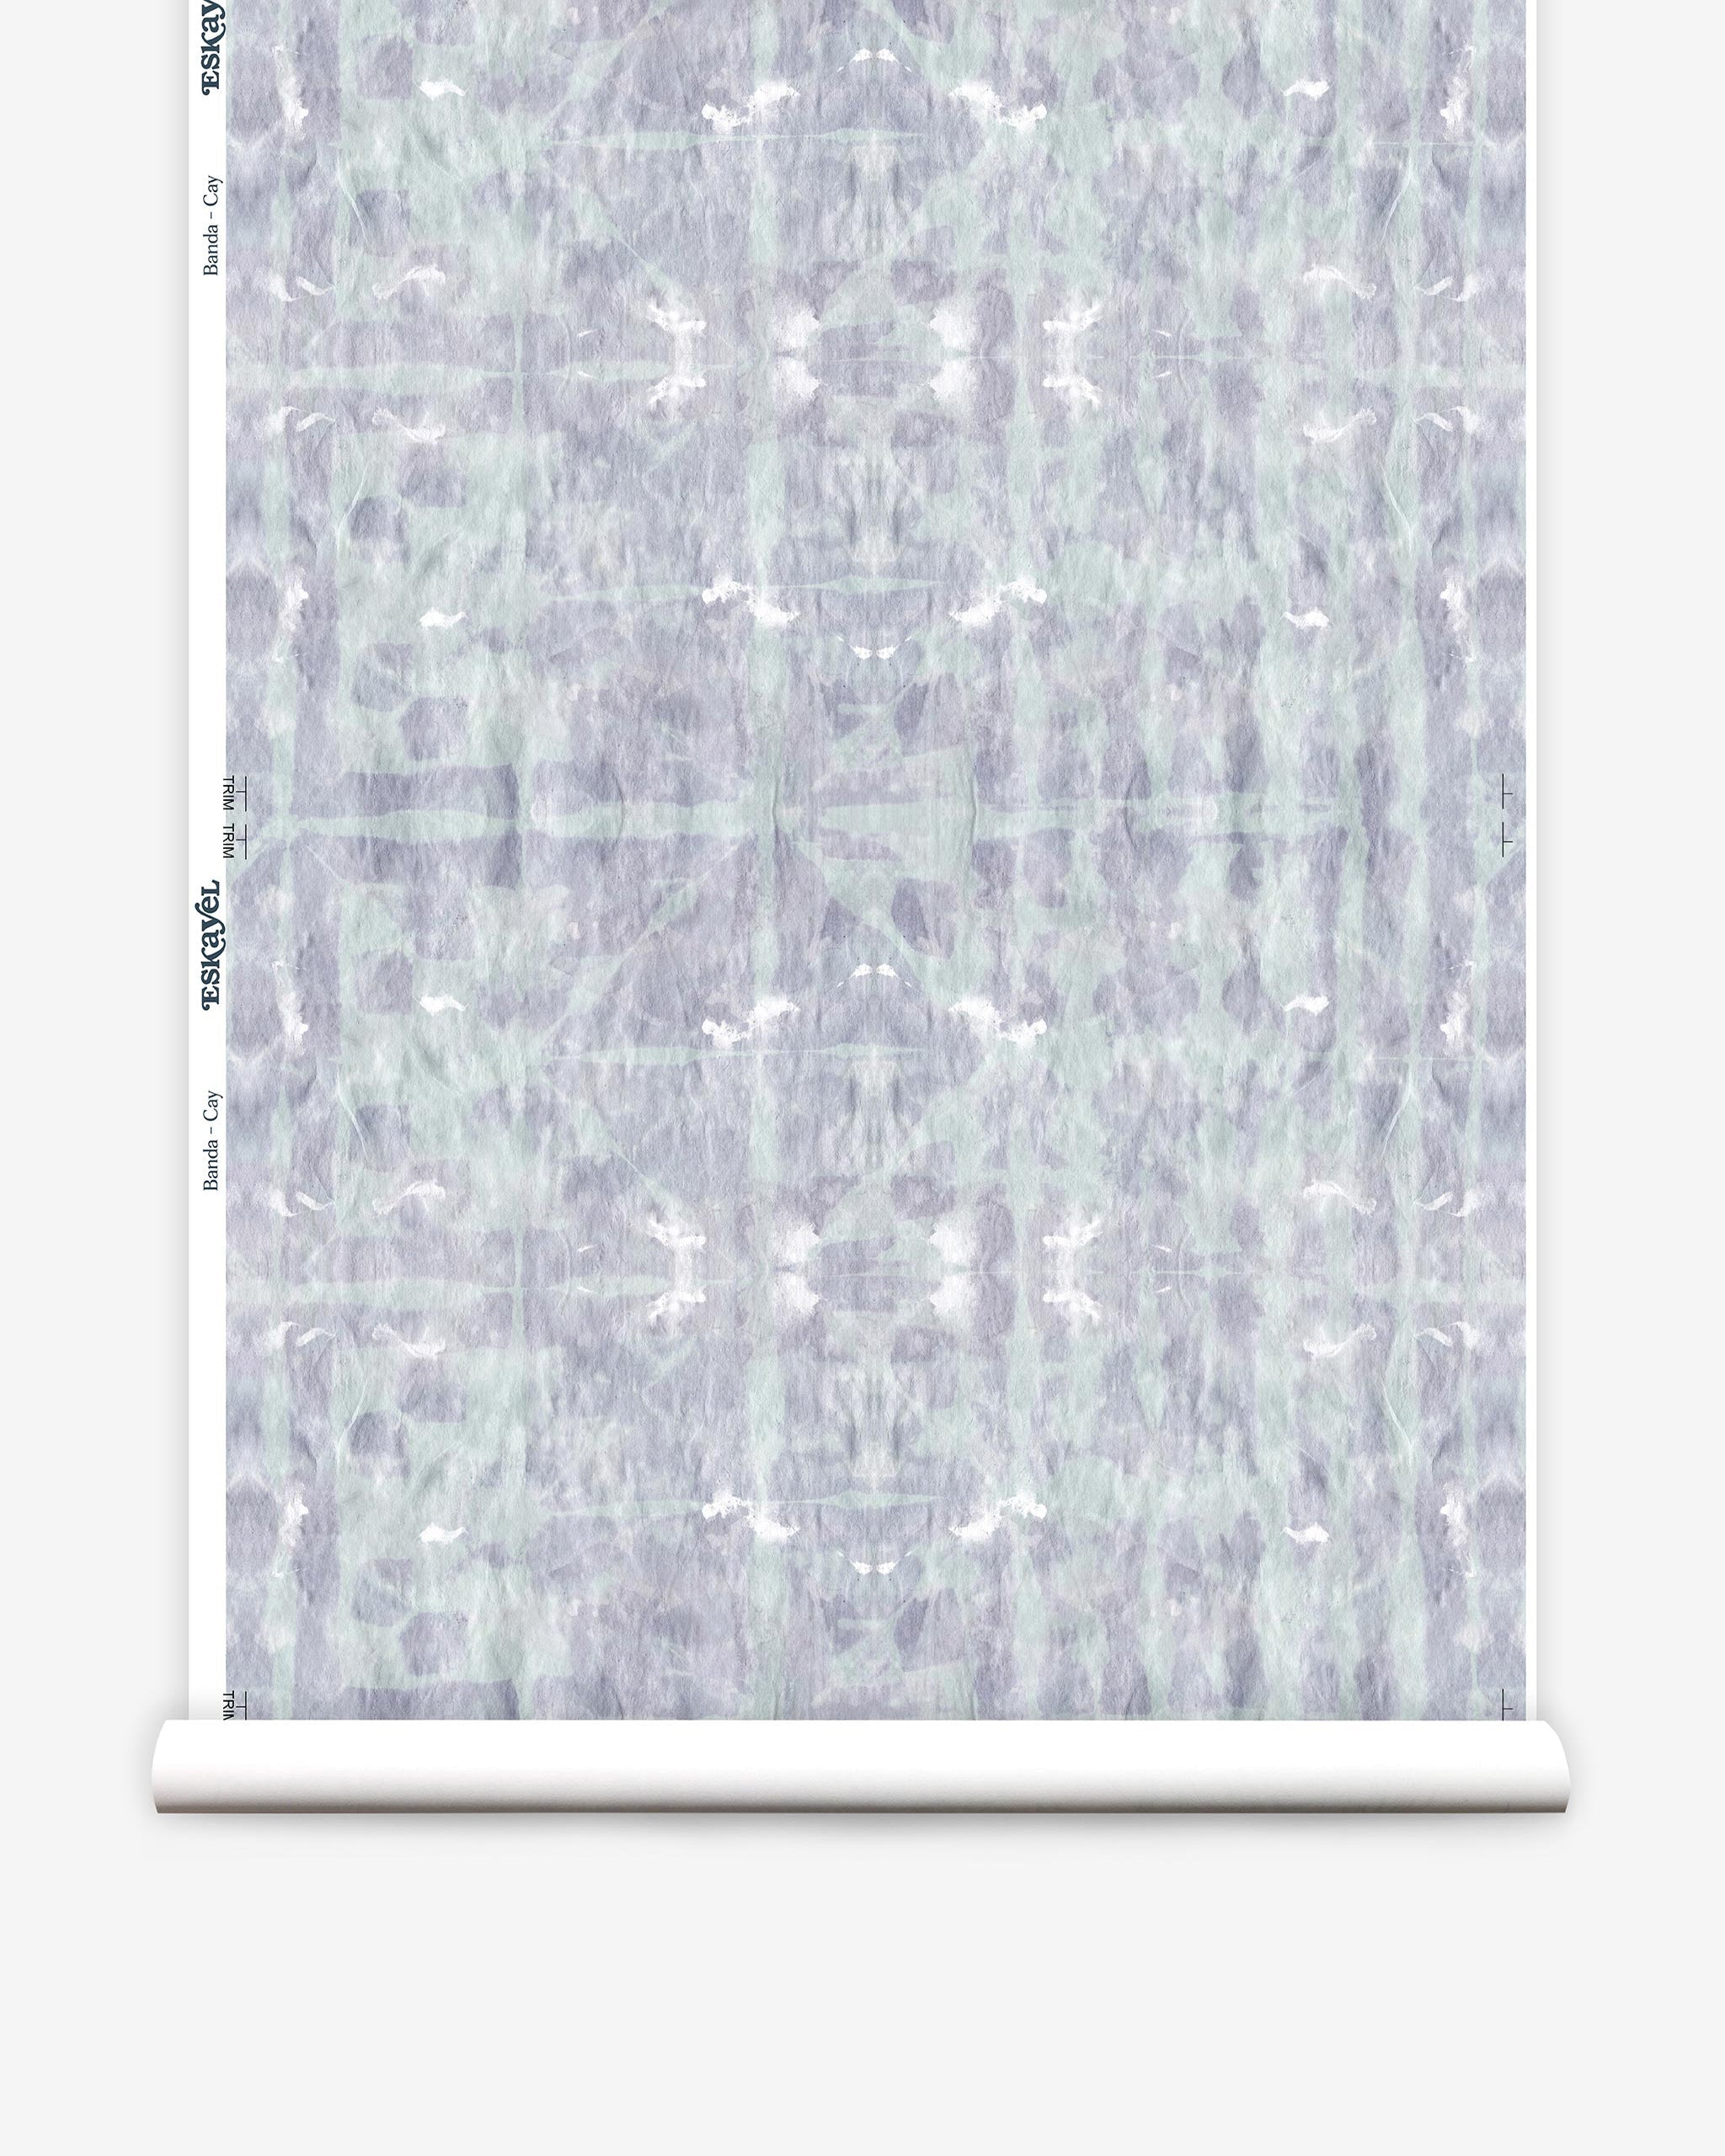 Partially unrolled wallpaper yardage in an abstract dyed grid print in mottled purple and turquoise.